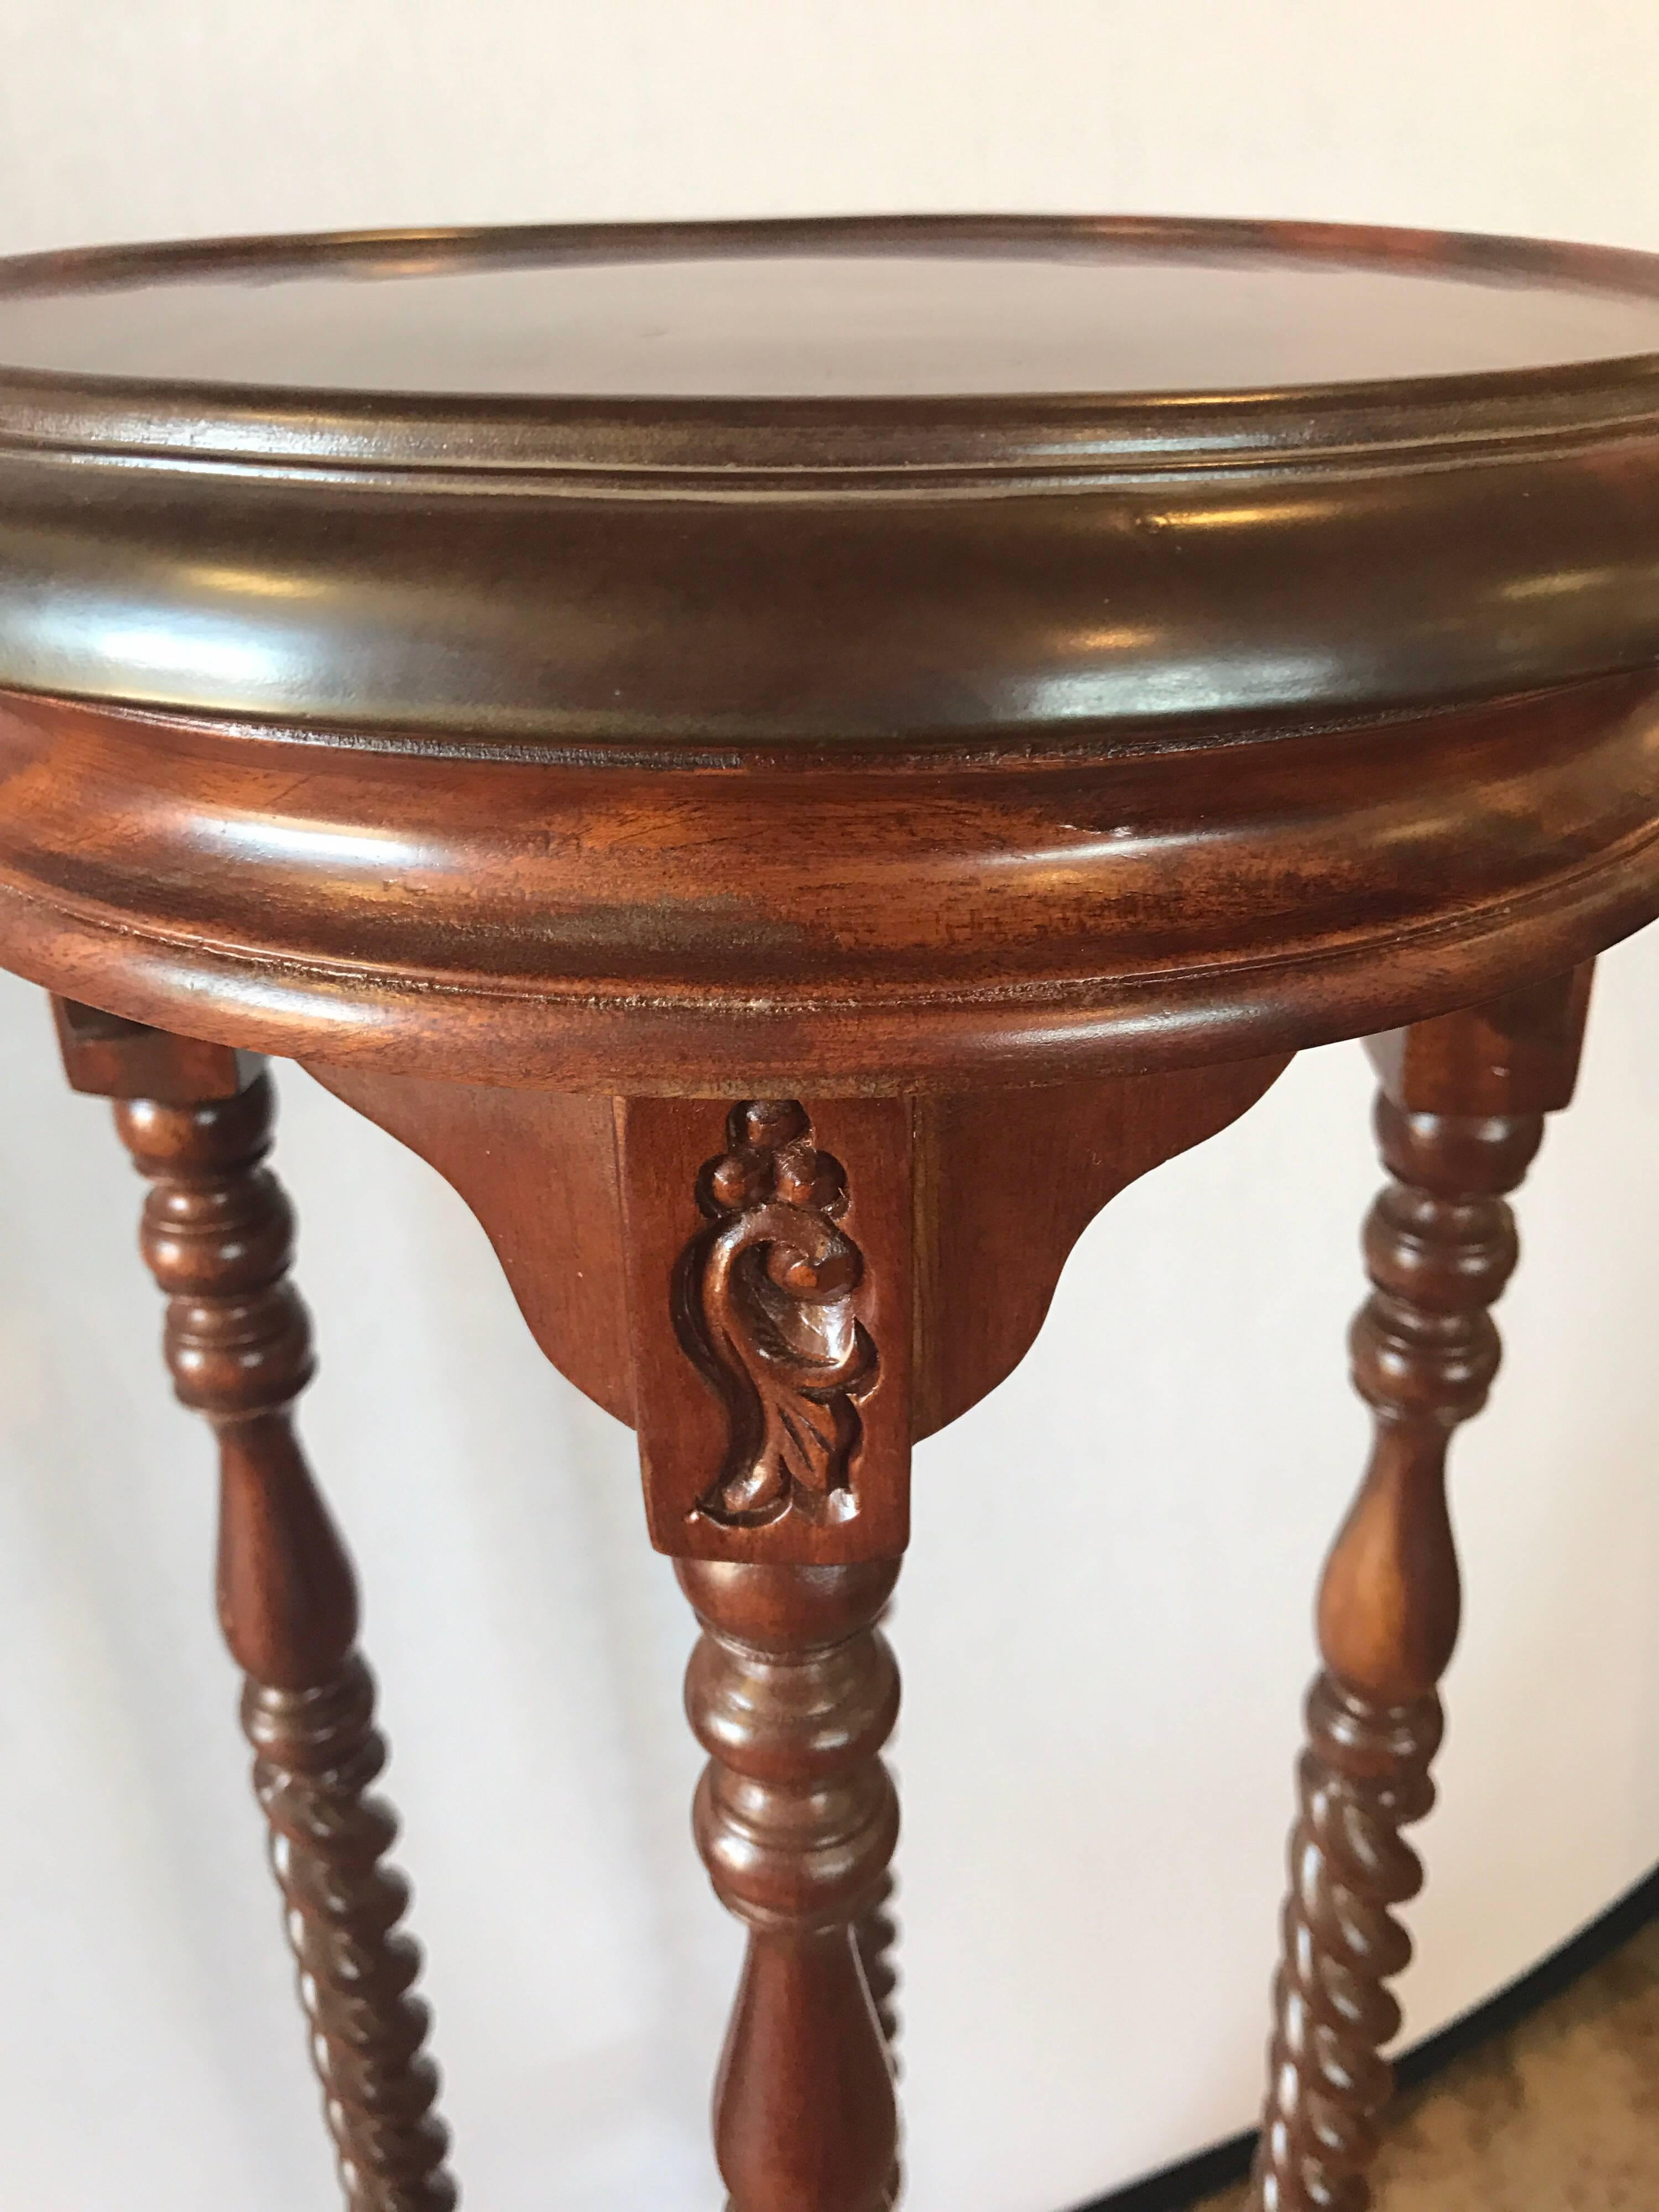 Pair of mahogany pedestals columns with intricate carving and turned legs.